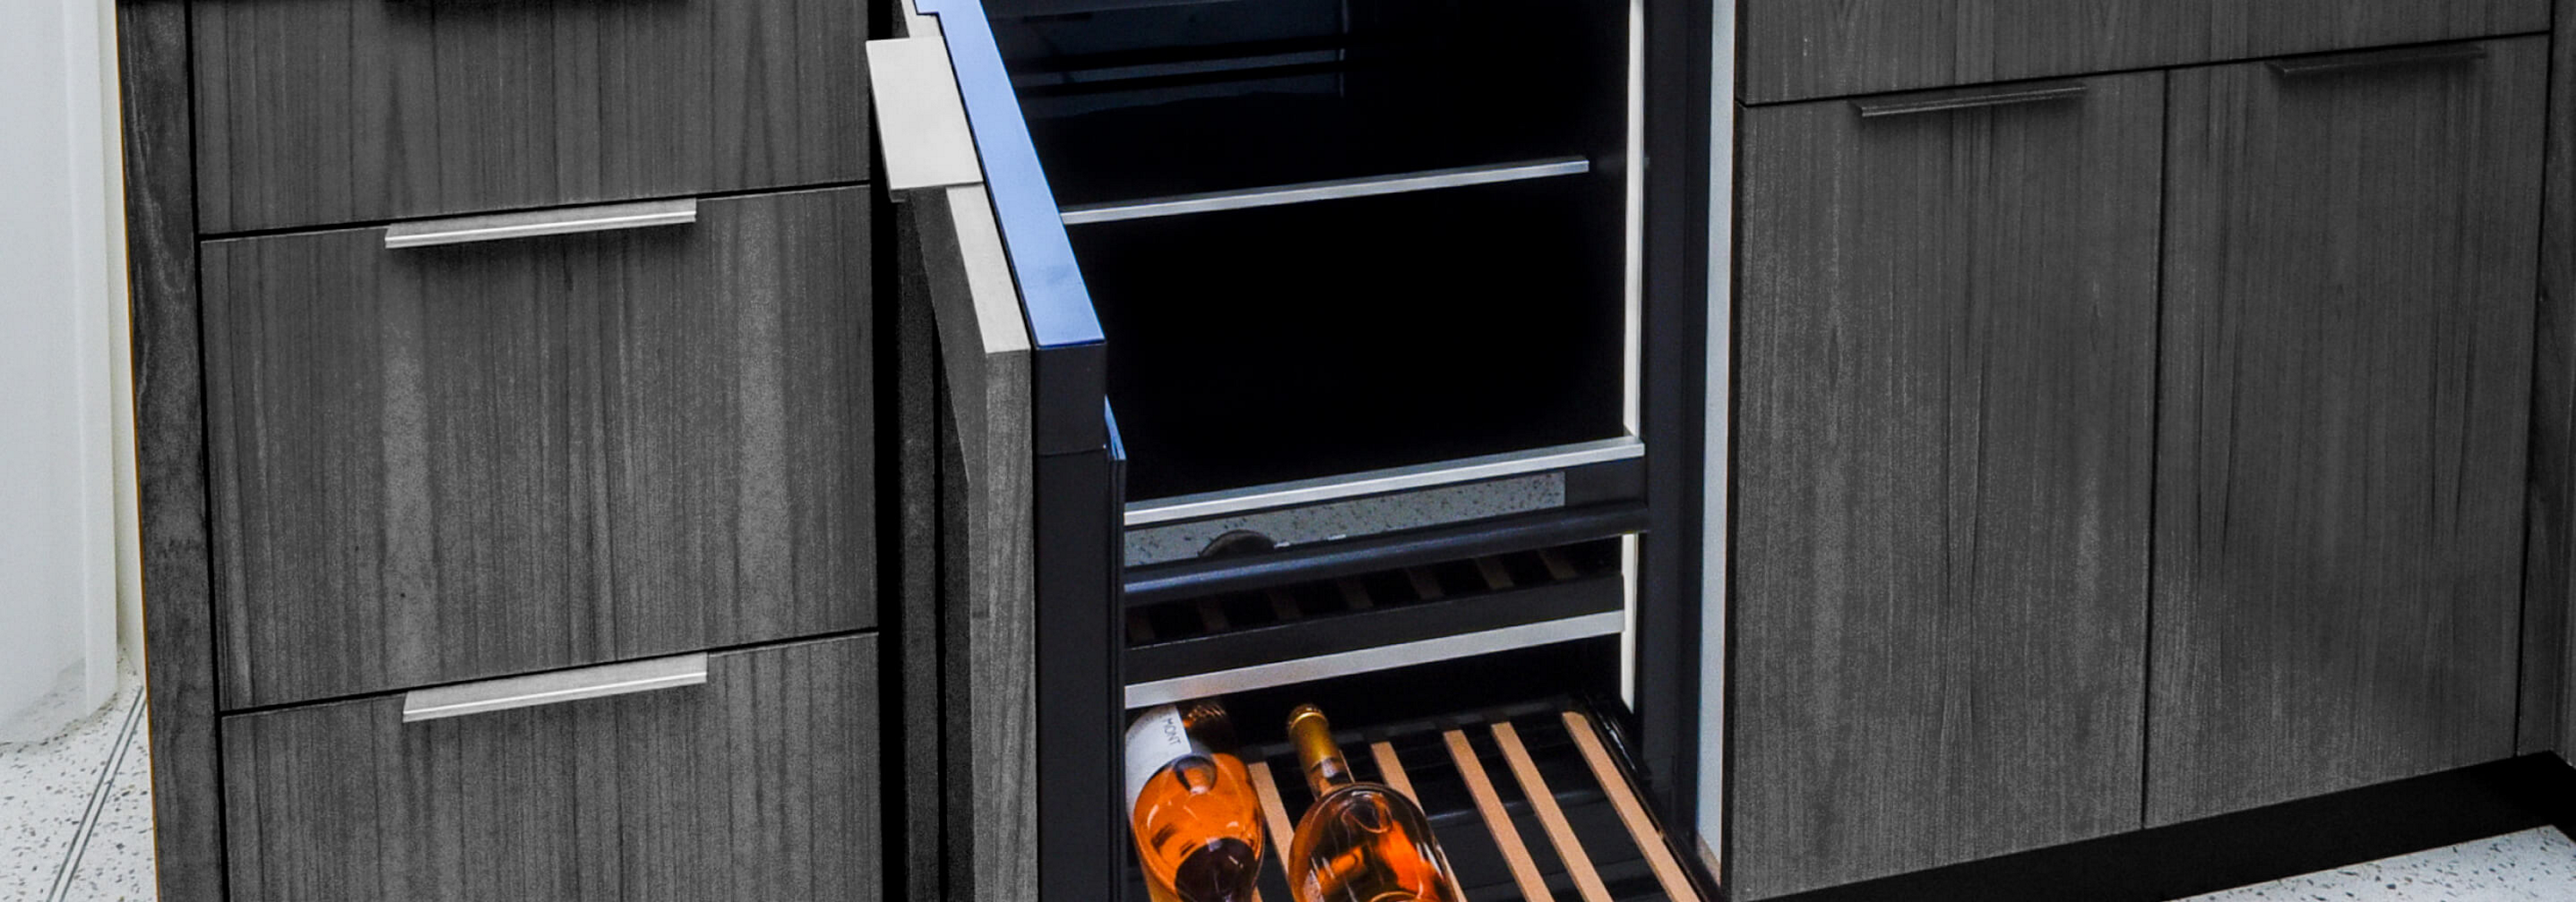 An undercounter refrigerator equipped with custom wooden panels that match the surrounding cabinetry.